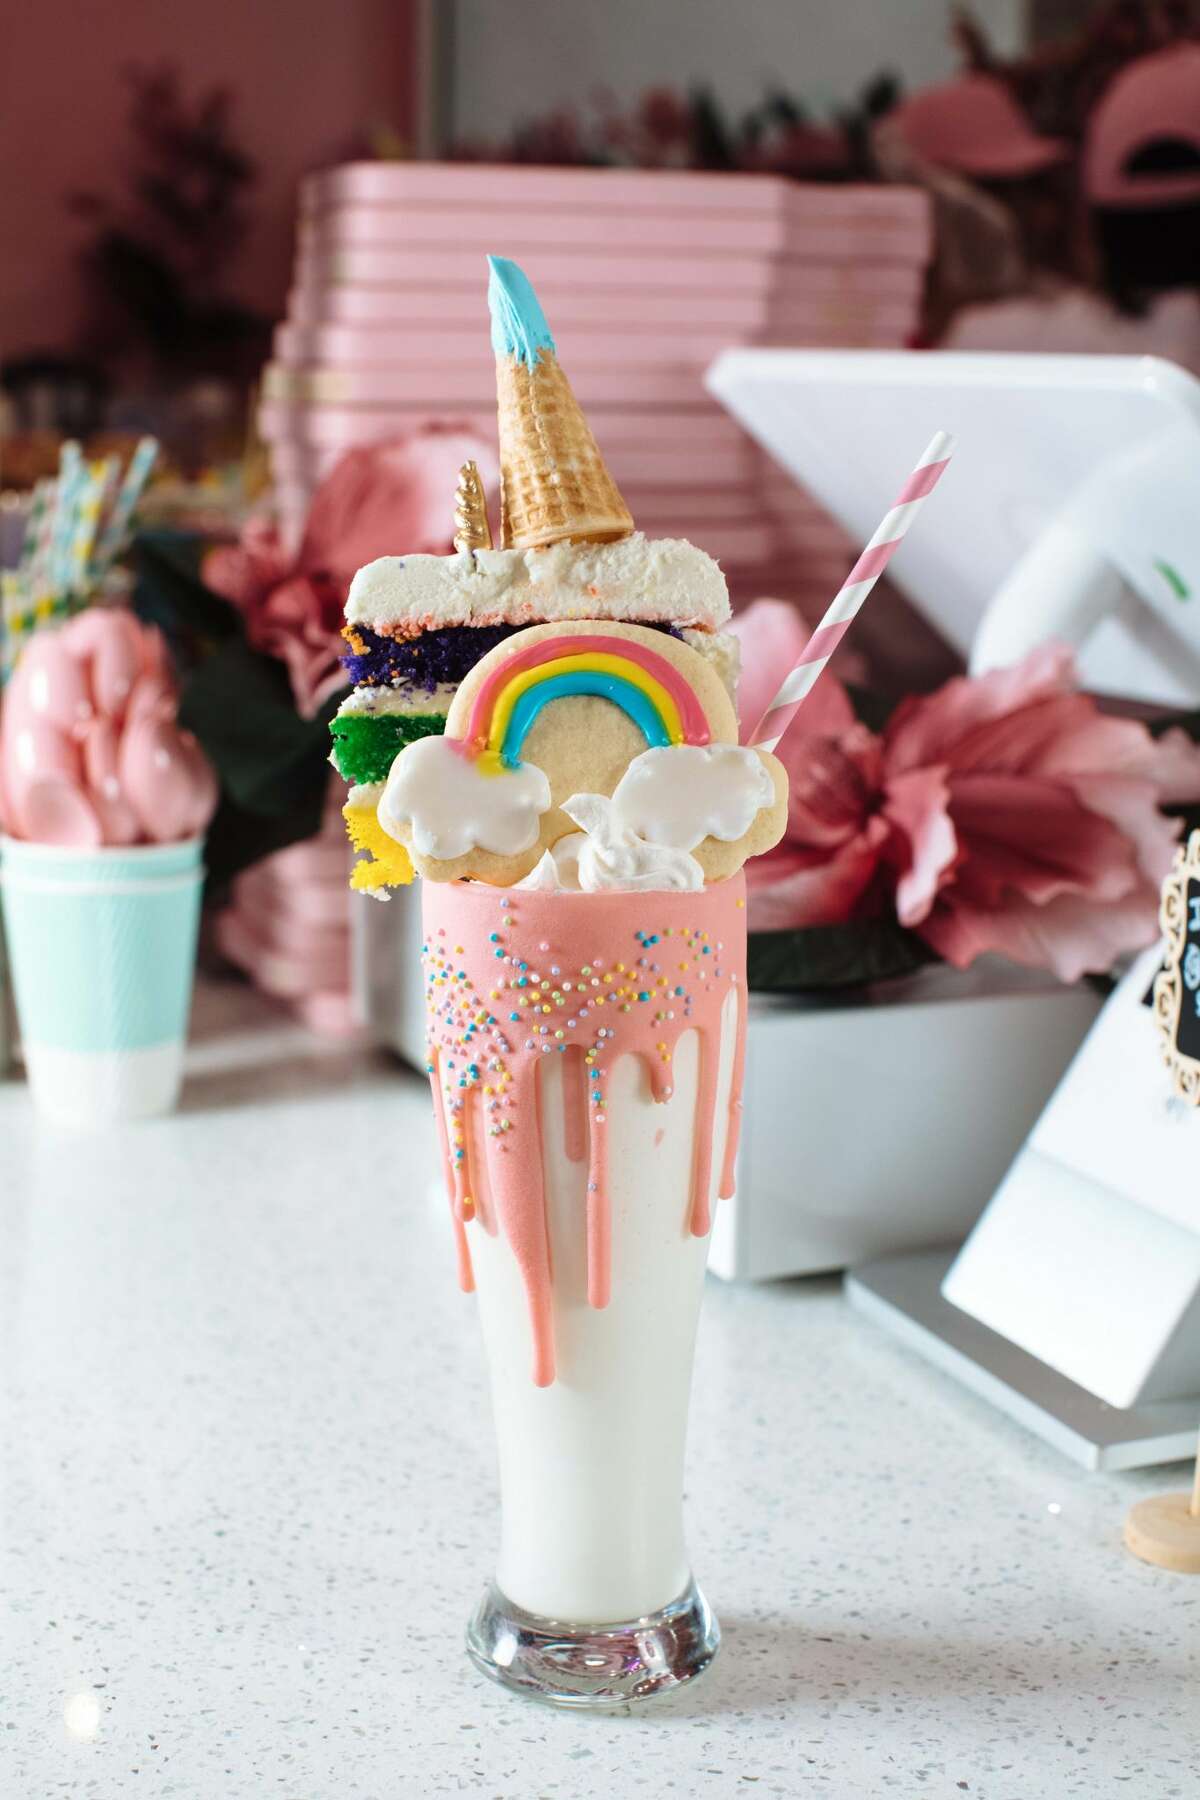 One of the most popular items at the Dallas location are the unicorn milkshakes. The vanilla milkshakes are topped with a piece of six-layer rainbow cake, adorned with a waffle cone that serves as the unicorn horn.